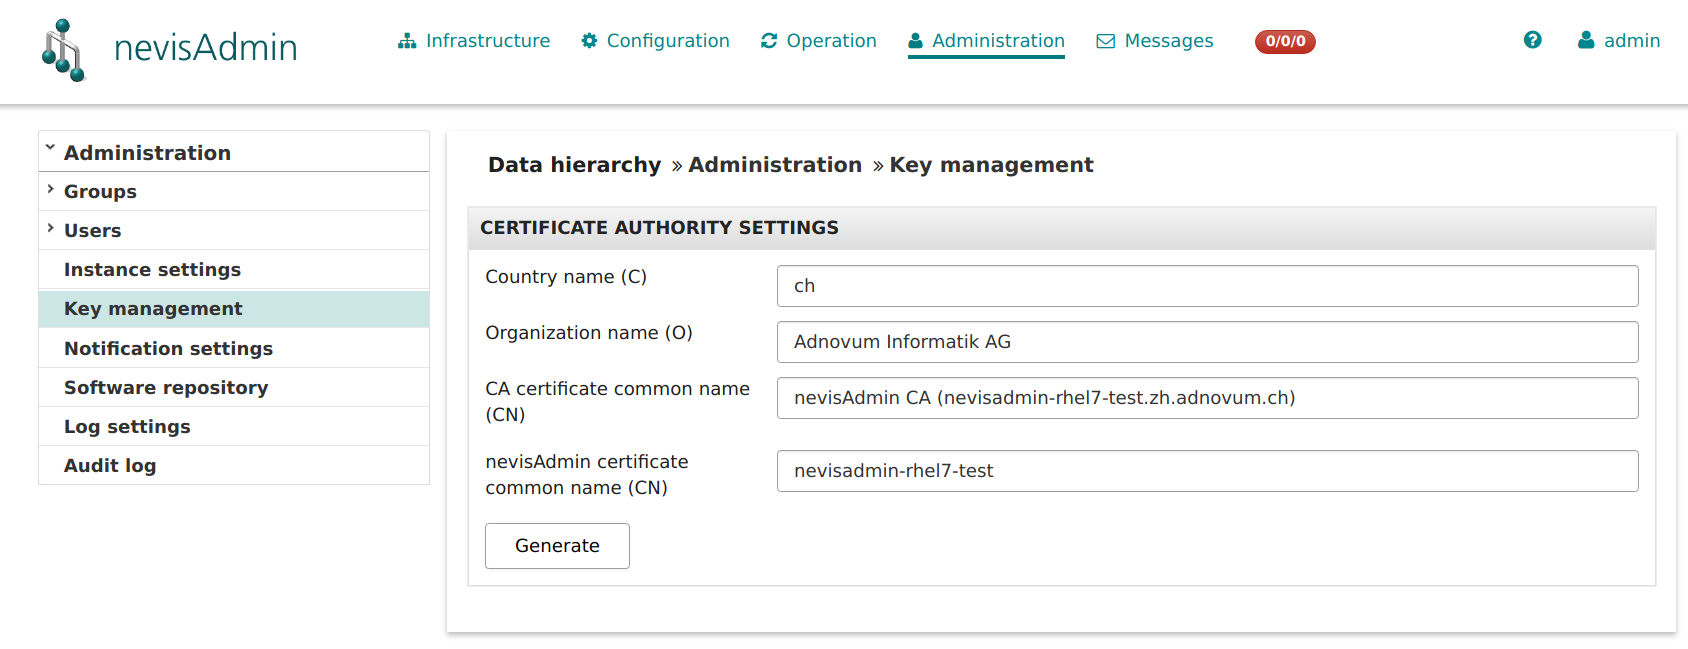 The Key management view in the Administration tab